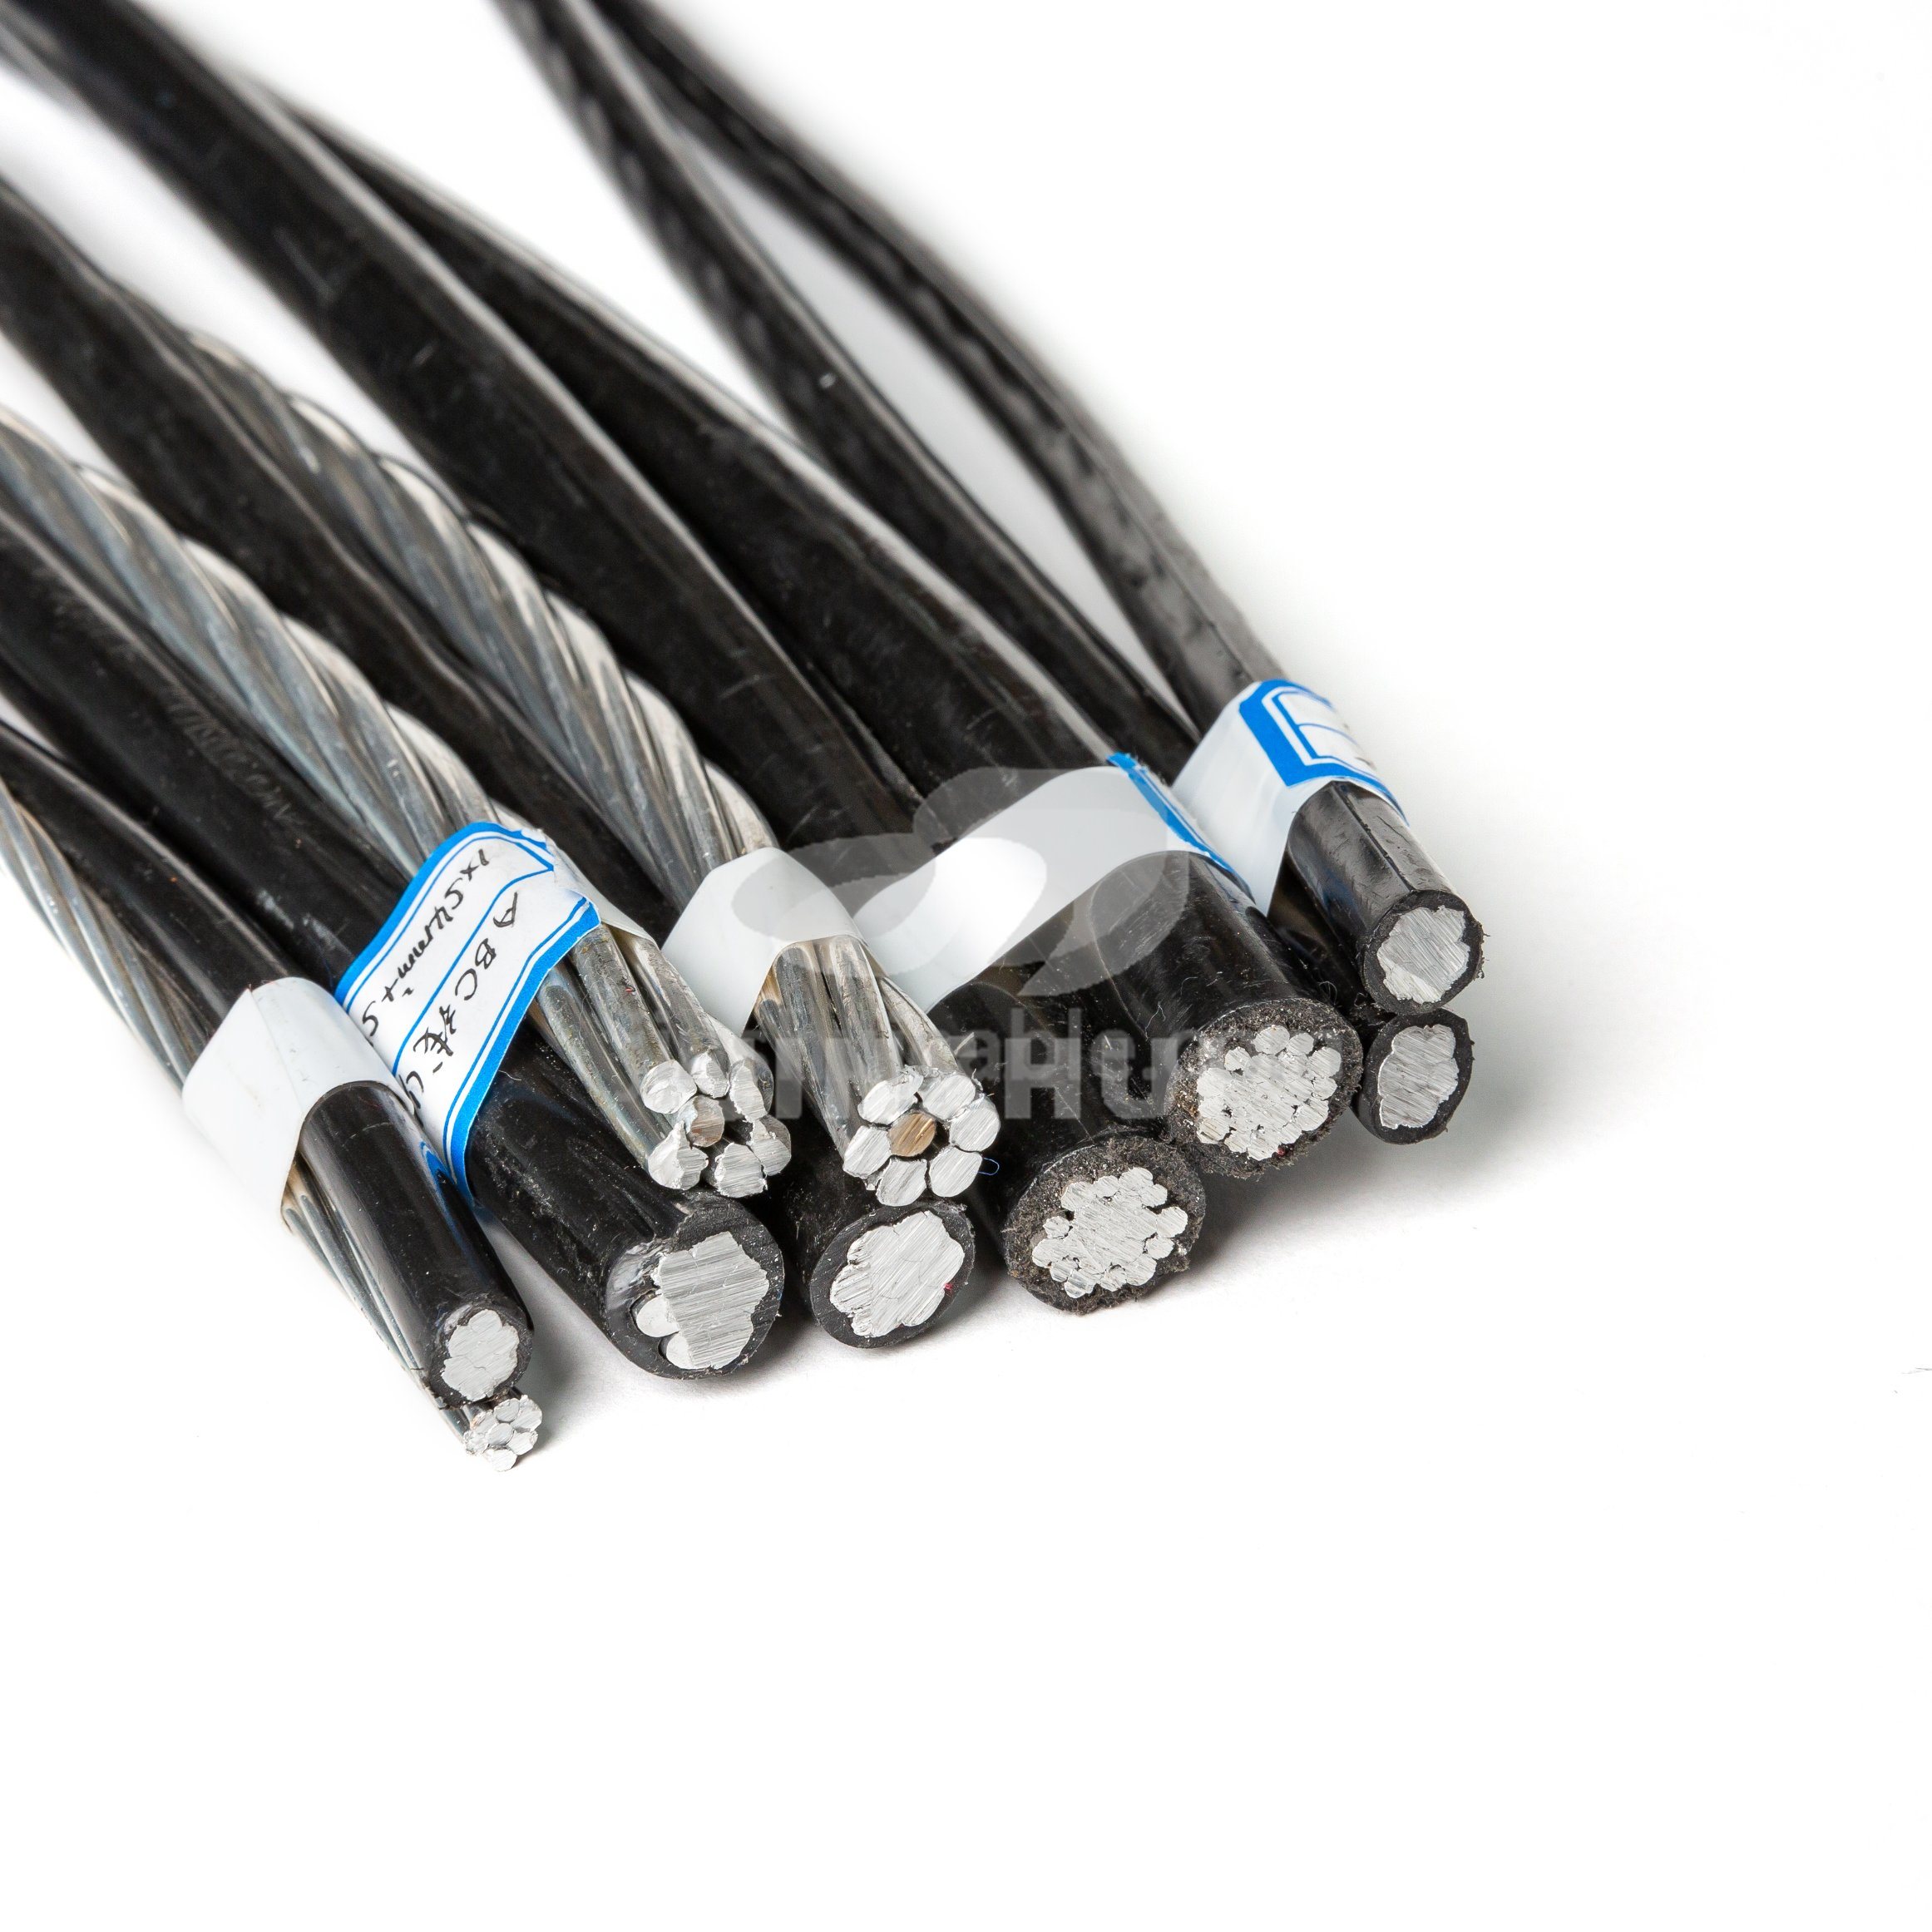 Low Voltage 3 Phase Overhead Triplex Service Drop Wire Aluminium Conductor Aerial Bundled Power Cable